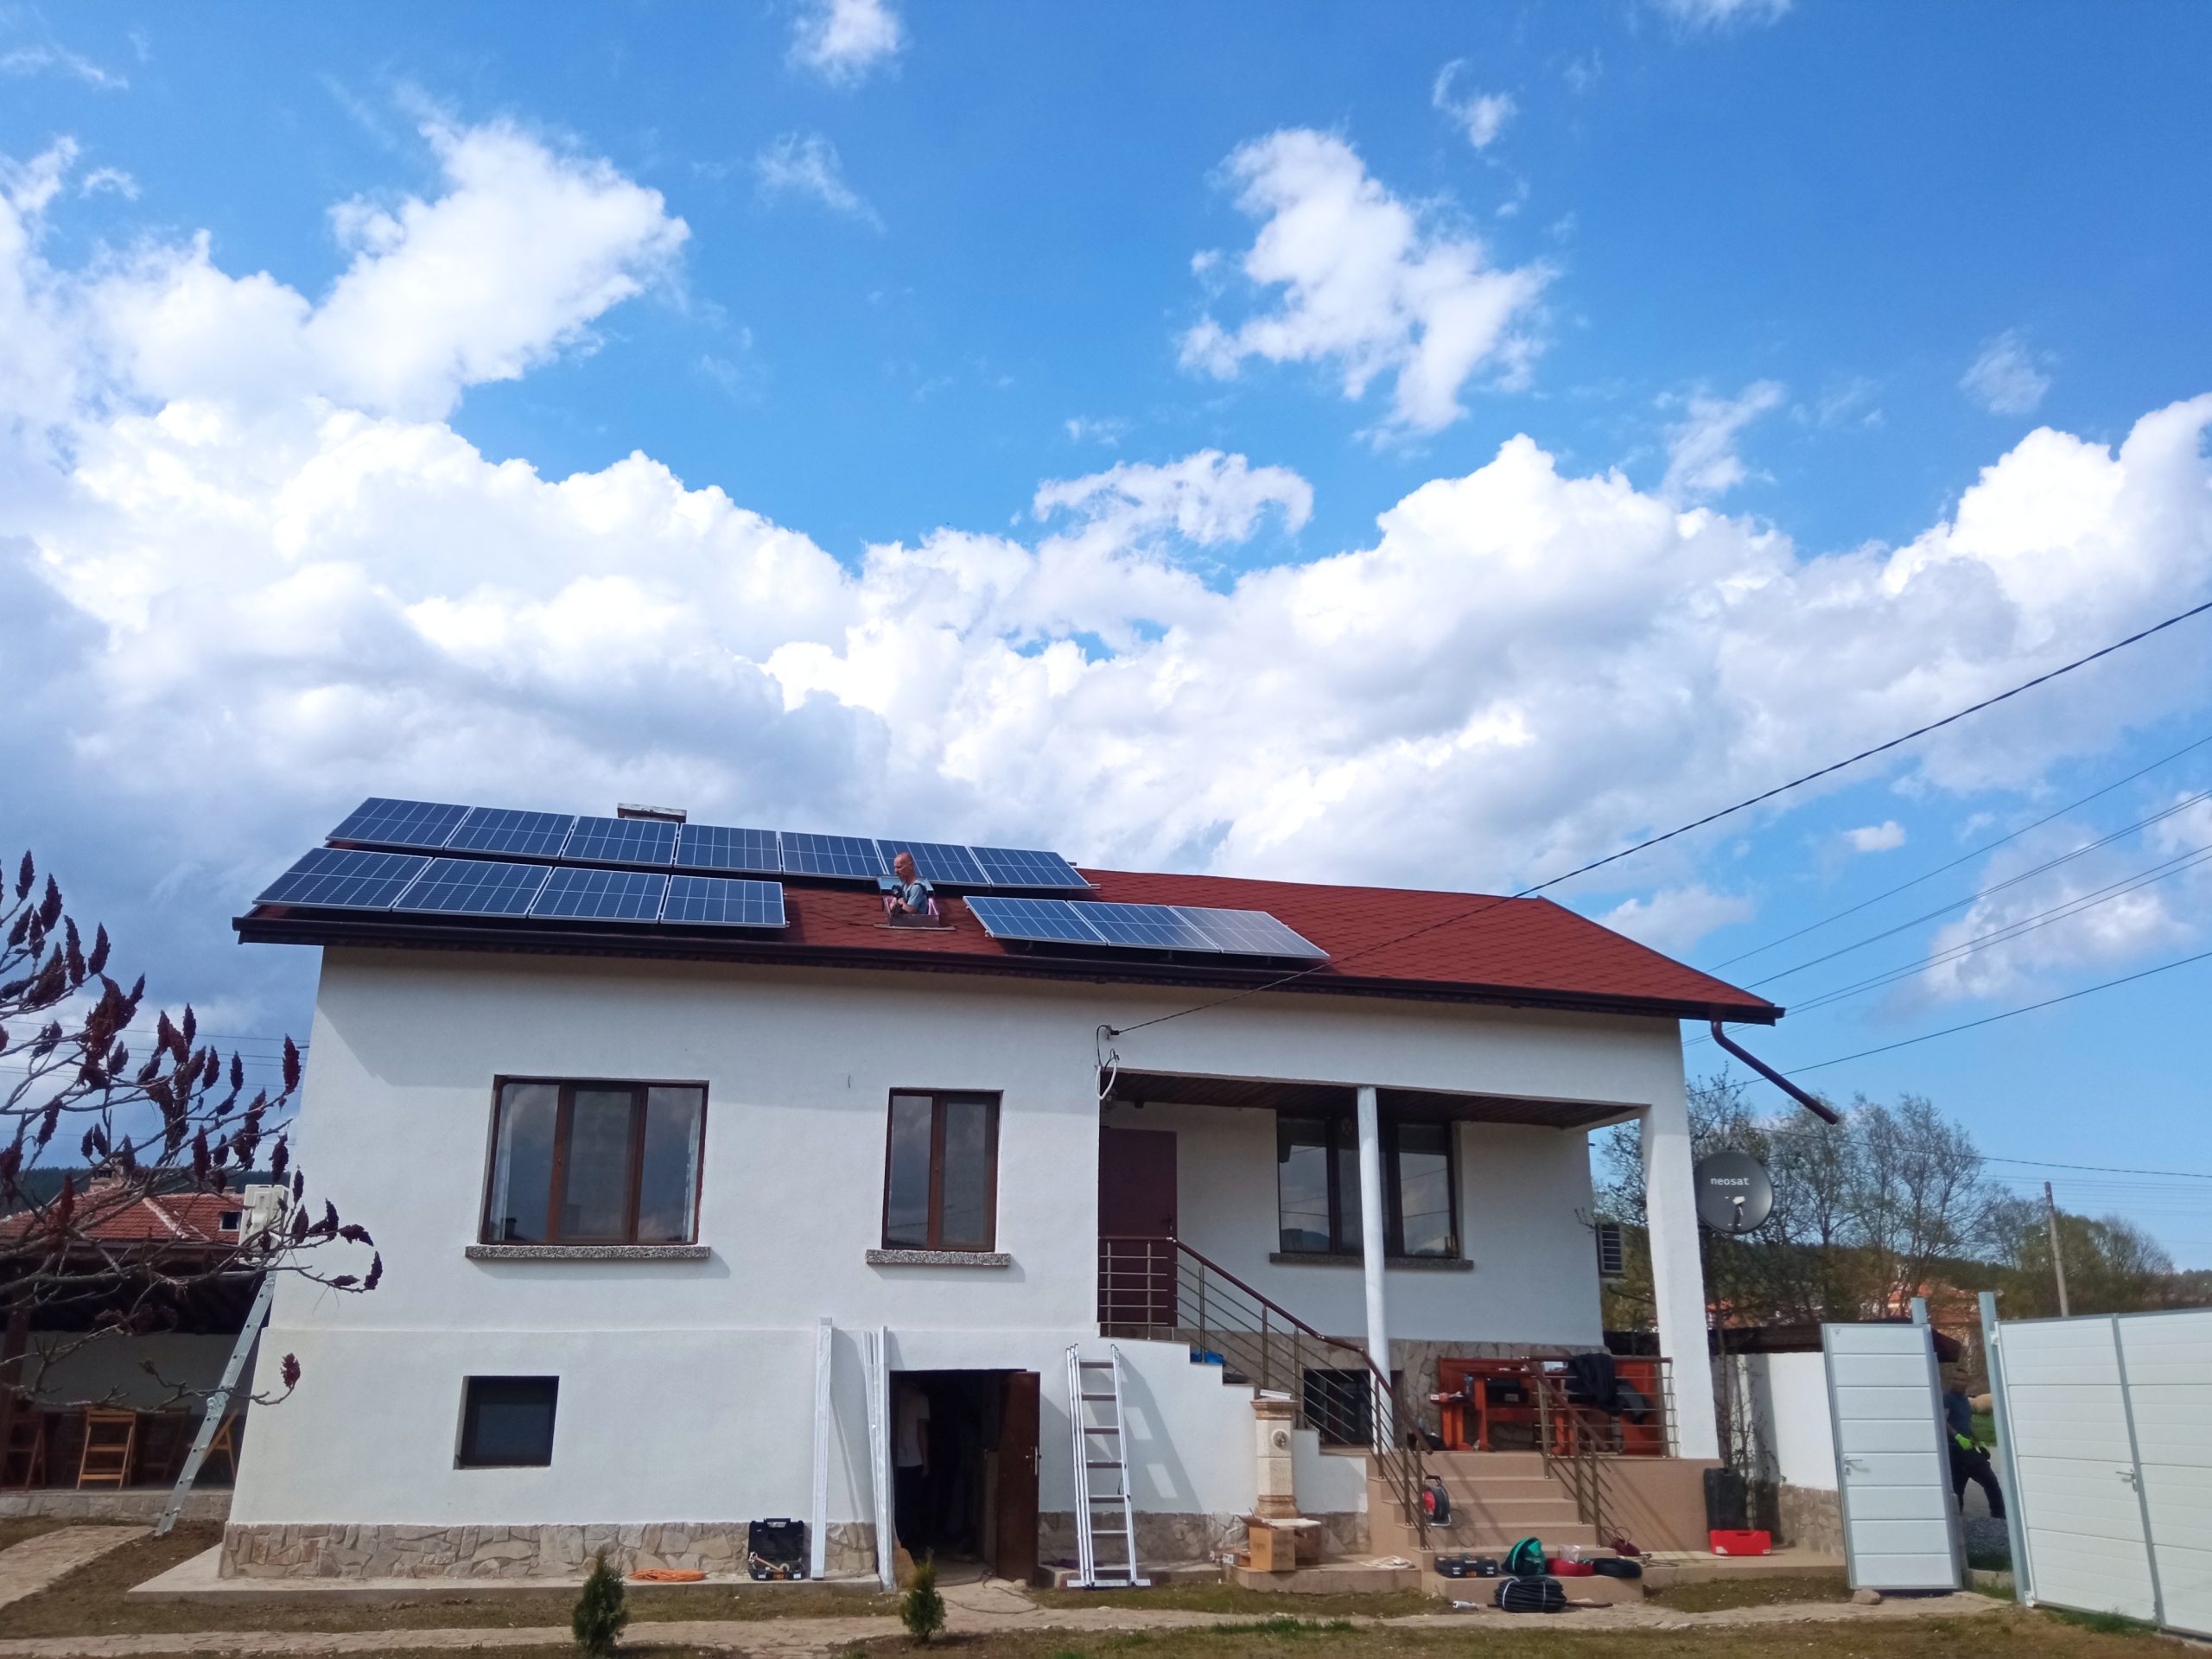 A house with solar panels.